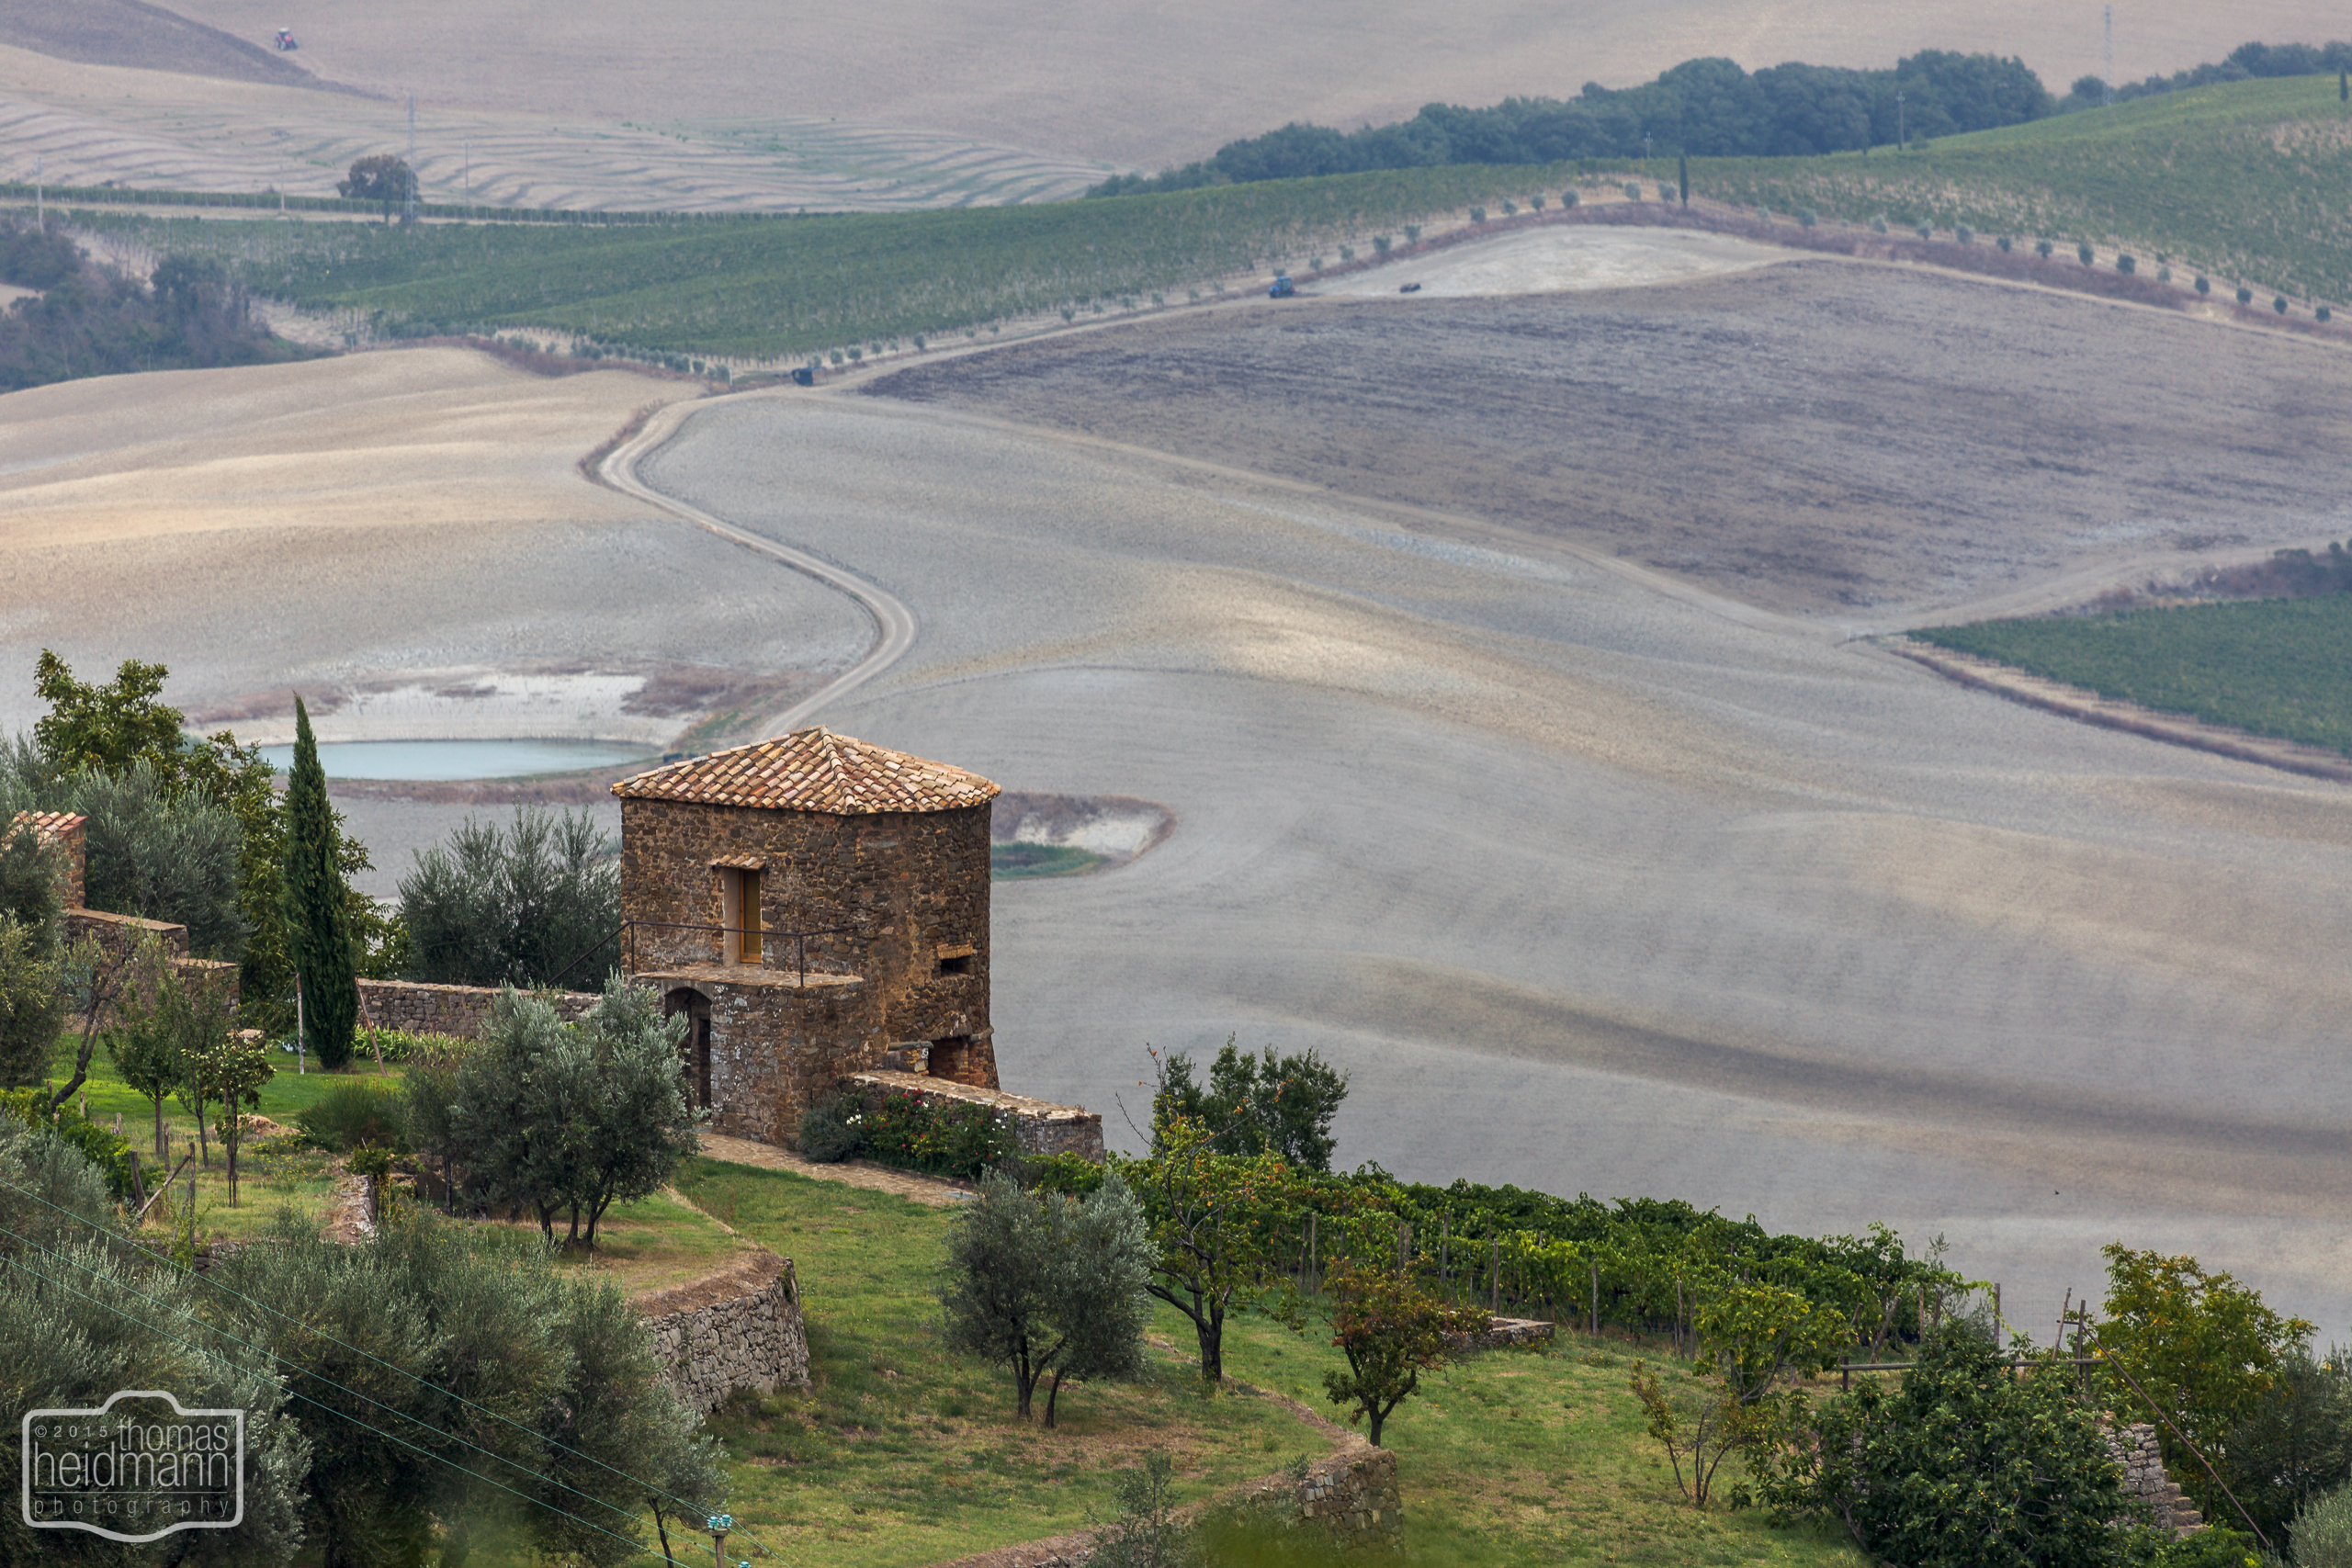 Gegend bei Montalcino im Val d'Orcia